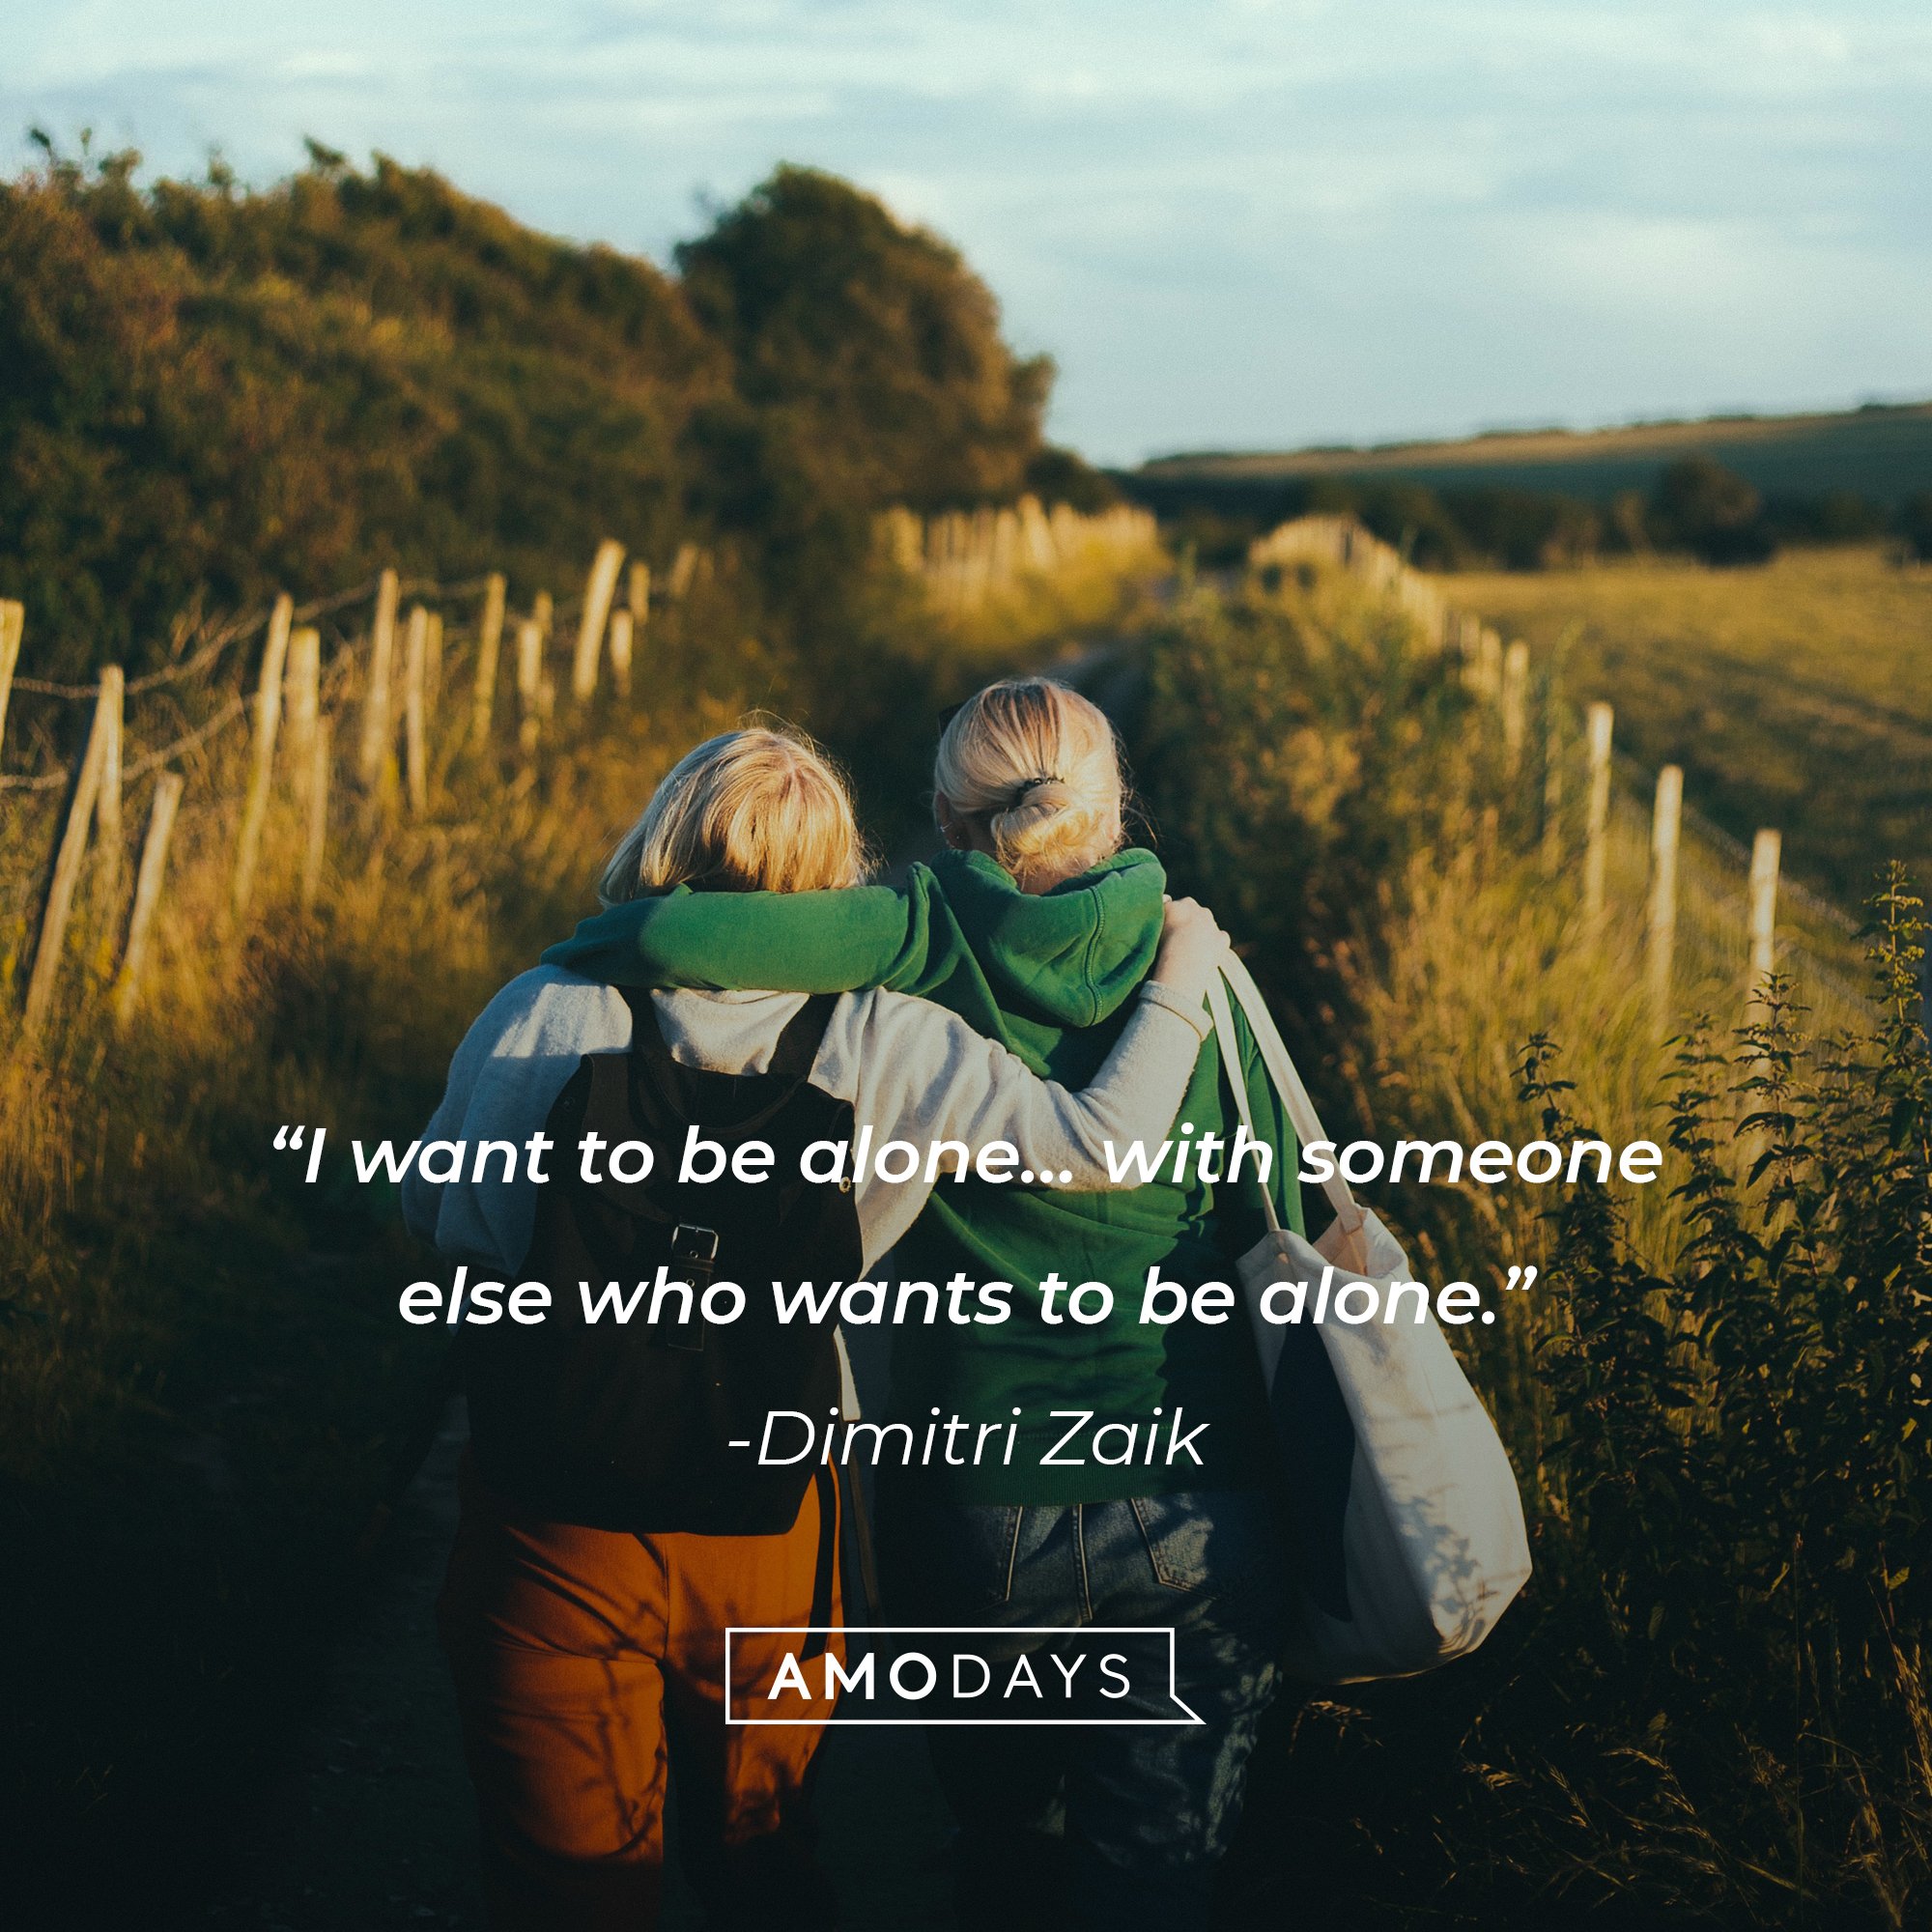 Dimitri Zaik's quote: “I want to be alone… with someone else who wants to be alone.” | Image: AmoDays